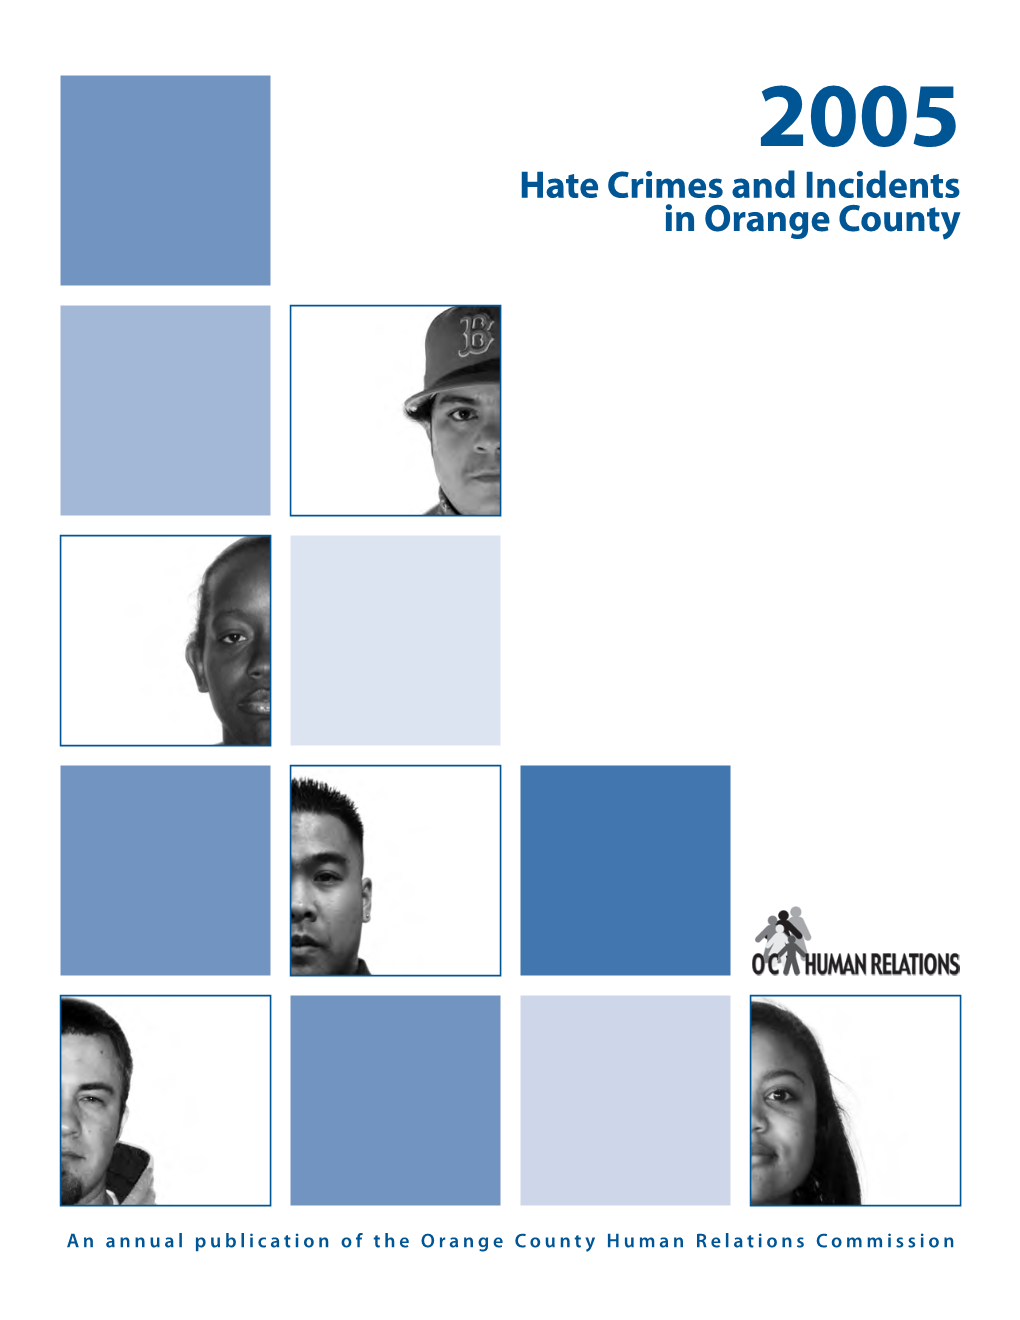 Hate Crimes and Incidents in Orange County